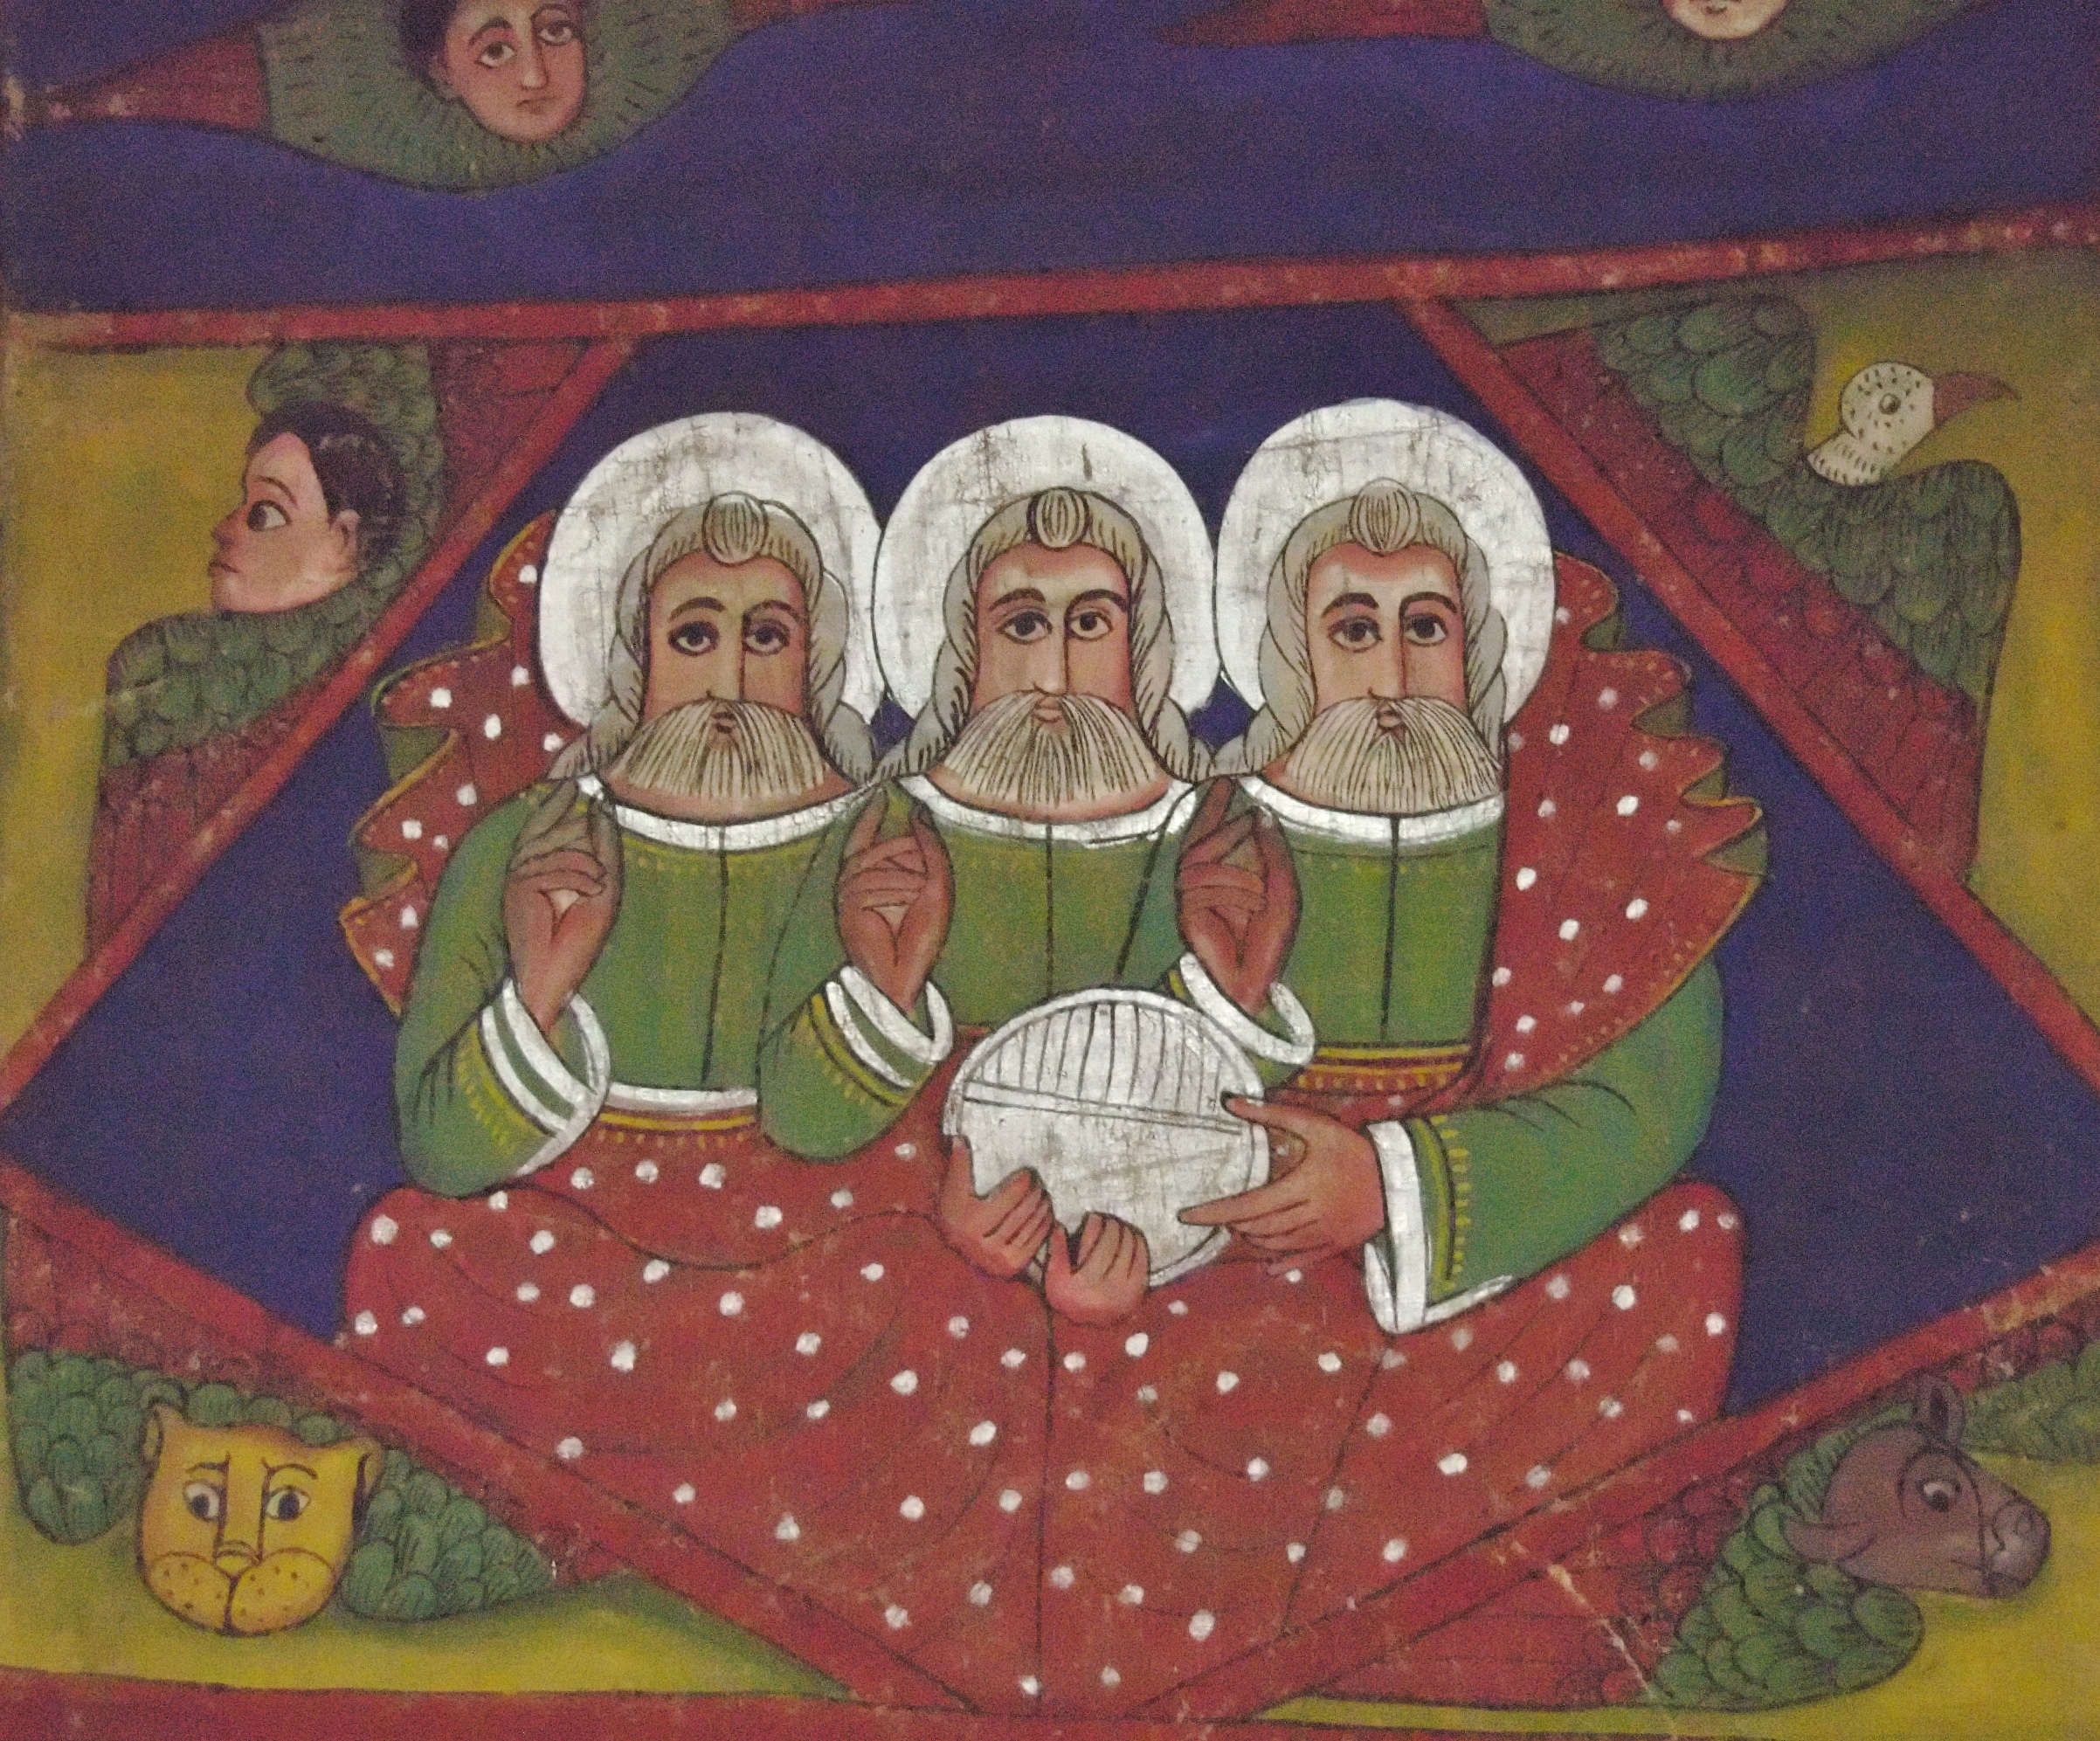 <p>The Trinity, the idea that God exists as three persons in one essence-Father, Son, and Holy Spirit-was not fully developed or explicitly articulated in the Bible. Instead, the concept emerged from early Christian theological discussions and debates. It gained clarity through councils such as the Council of Nicaea in 325 AD and the Council of Constantinople in 381 AD, where doctrines regarding the nature of God and the divinity of Jesus were formulated. The Trinity became a central tenet of mainstream Christian belief, shaping understandings of God’s complex nature as three distinct persons in one essence. These theological developments were crucial in defining orthodox Christian doctrine and addressing theological questions within the early church.</p>